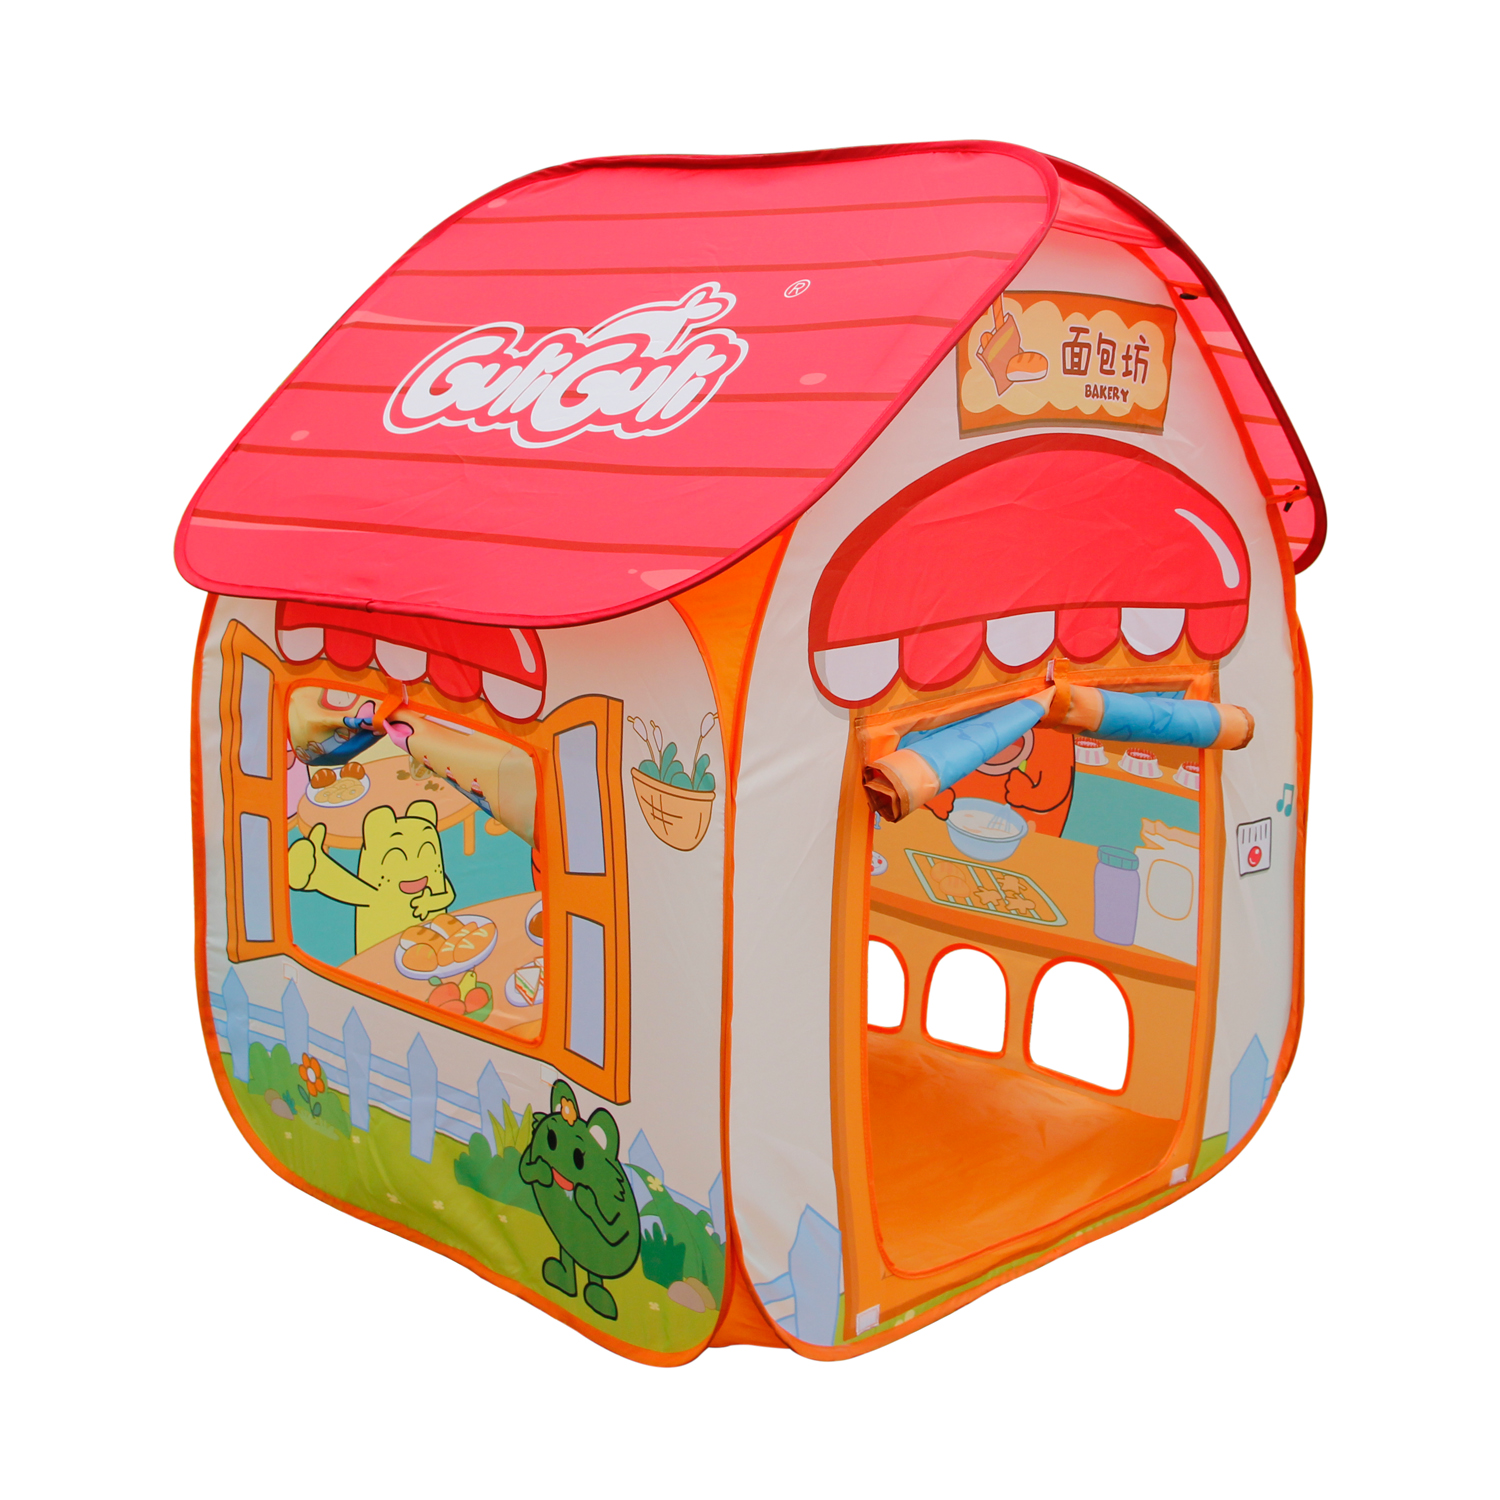 HOMFU  Guli Pop Up Kids Tent With 50 Balls Indoor Outdoor Children Play Tent Toy Tent Playhouse For Boys Girls  